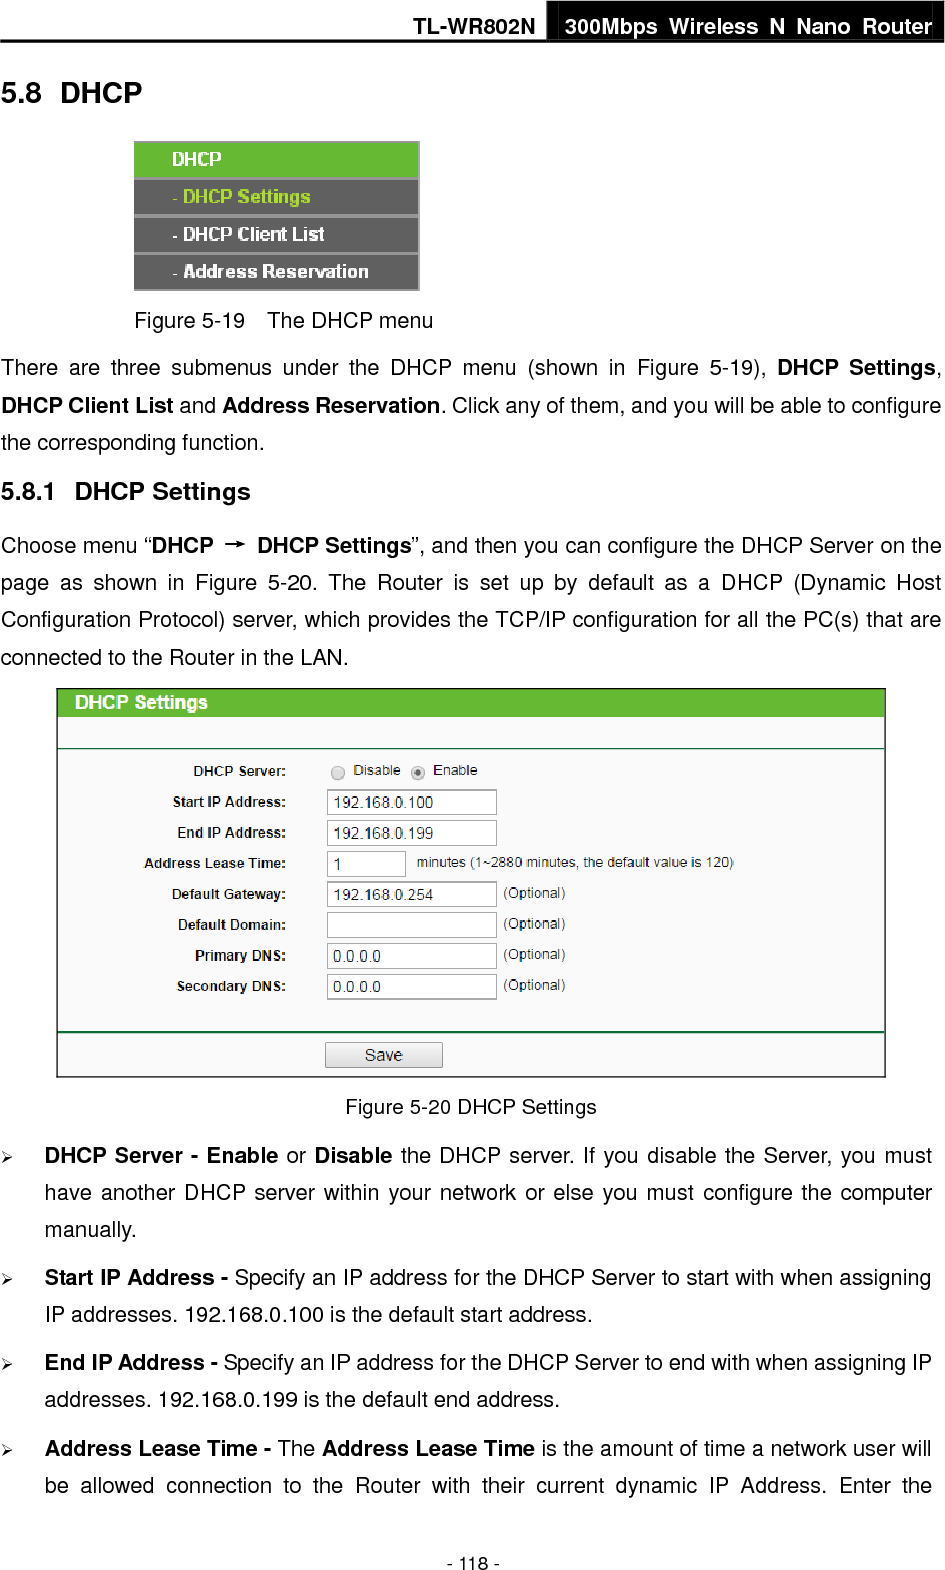 TL-WR802N 300Mbps  Wireless  N  Nano  Router  - 118 - 5.8  DHCP  Figure 5-19  The DHCP menu There  are  three  submenus  under  the  DHCP  menu  (shown  in  Figure  5-19),  DHCP  Settings, DHCP Client List and Address Reservation. Click any of them, and you will be able to configure the corresponding function. 5.8.1  DHCP Settings Choose menu “DHCP  →  DHCP Settings”, and then you can configure the DHCP Server on the page  as  shown  in  Figure  5-20.  The  Router  is  set  up  by  default  as  a  DHCP  (Dynamic  Host Configuration Protocol) server, which provides the TCP/IP configuration for all the PC(s) that are connected to the Router in the LAN.    Figure 5-20 DHCP Settings  DHCP Server - Enable or Disable the DHCP server. If you disable the Server, you must have another DHCP server within your network or else you must configure the computer manually.  Start IP Address - Specify an IP address for the DHCP Server to start with when assigning IP addresses. 192.168.0.100 is the default start address.  End IP Address - Specify an IP address for the DHCP Server to end with when assigning IP addresses. 192.168.0.199 is the default end address.  Address Lease Time - The Address Lease Time is the amount of time a network user will be  allowed  connection  to  the  Router  with  their  current  dynamic  IP  Address.  Enter  the 